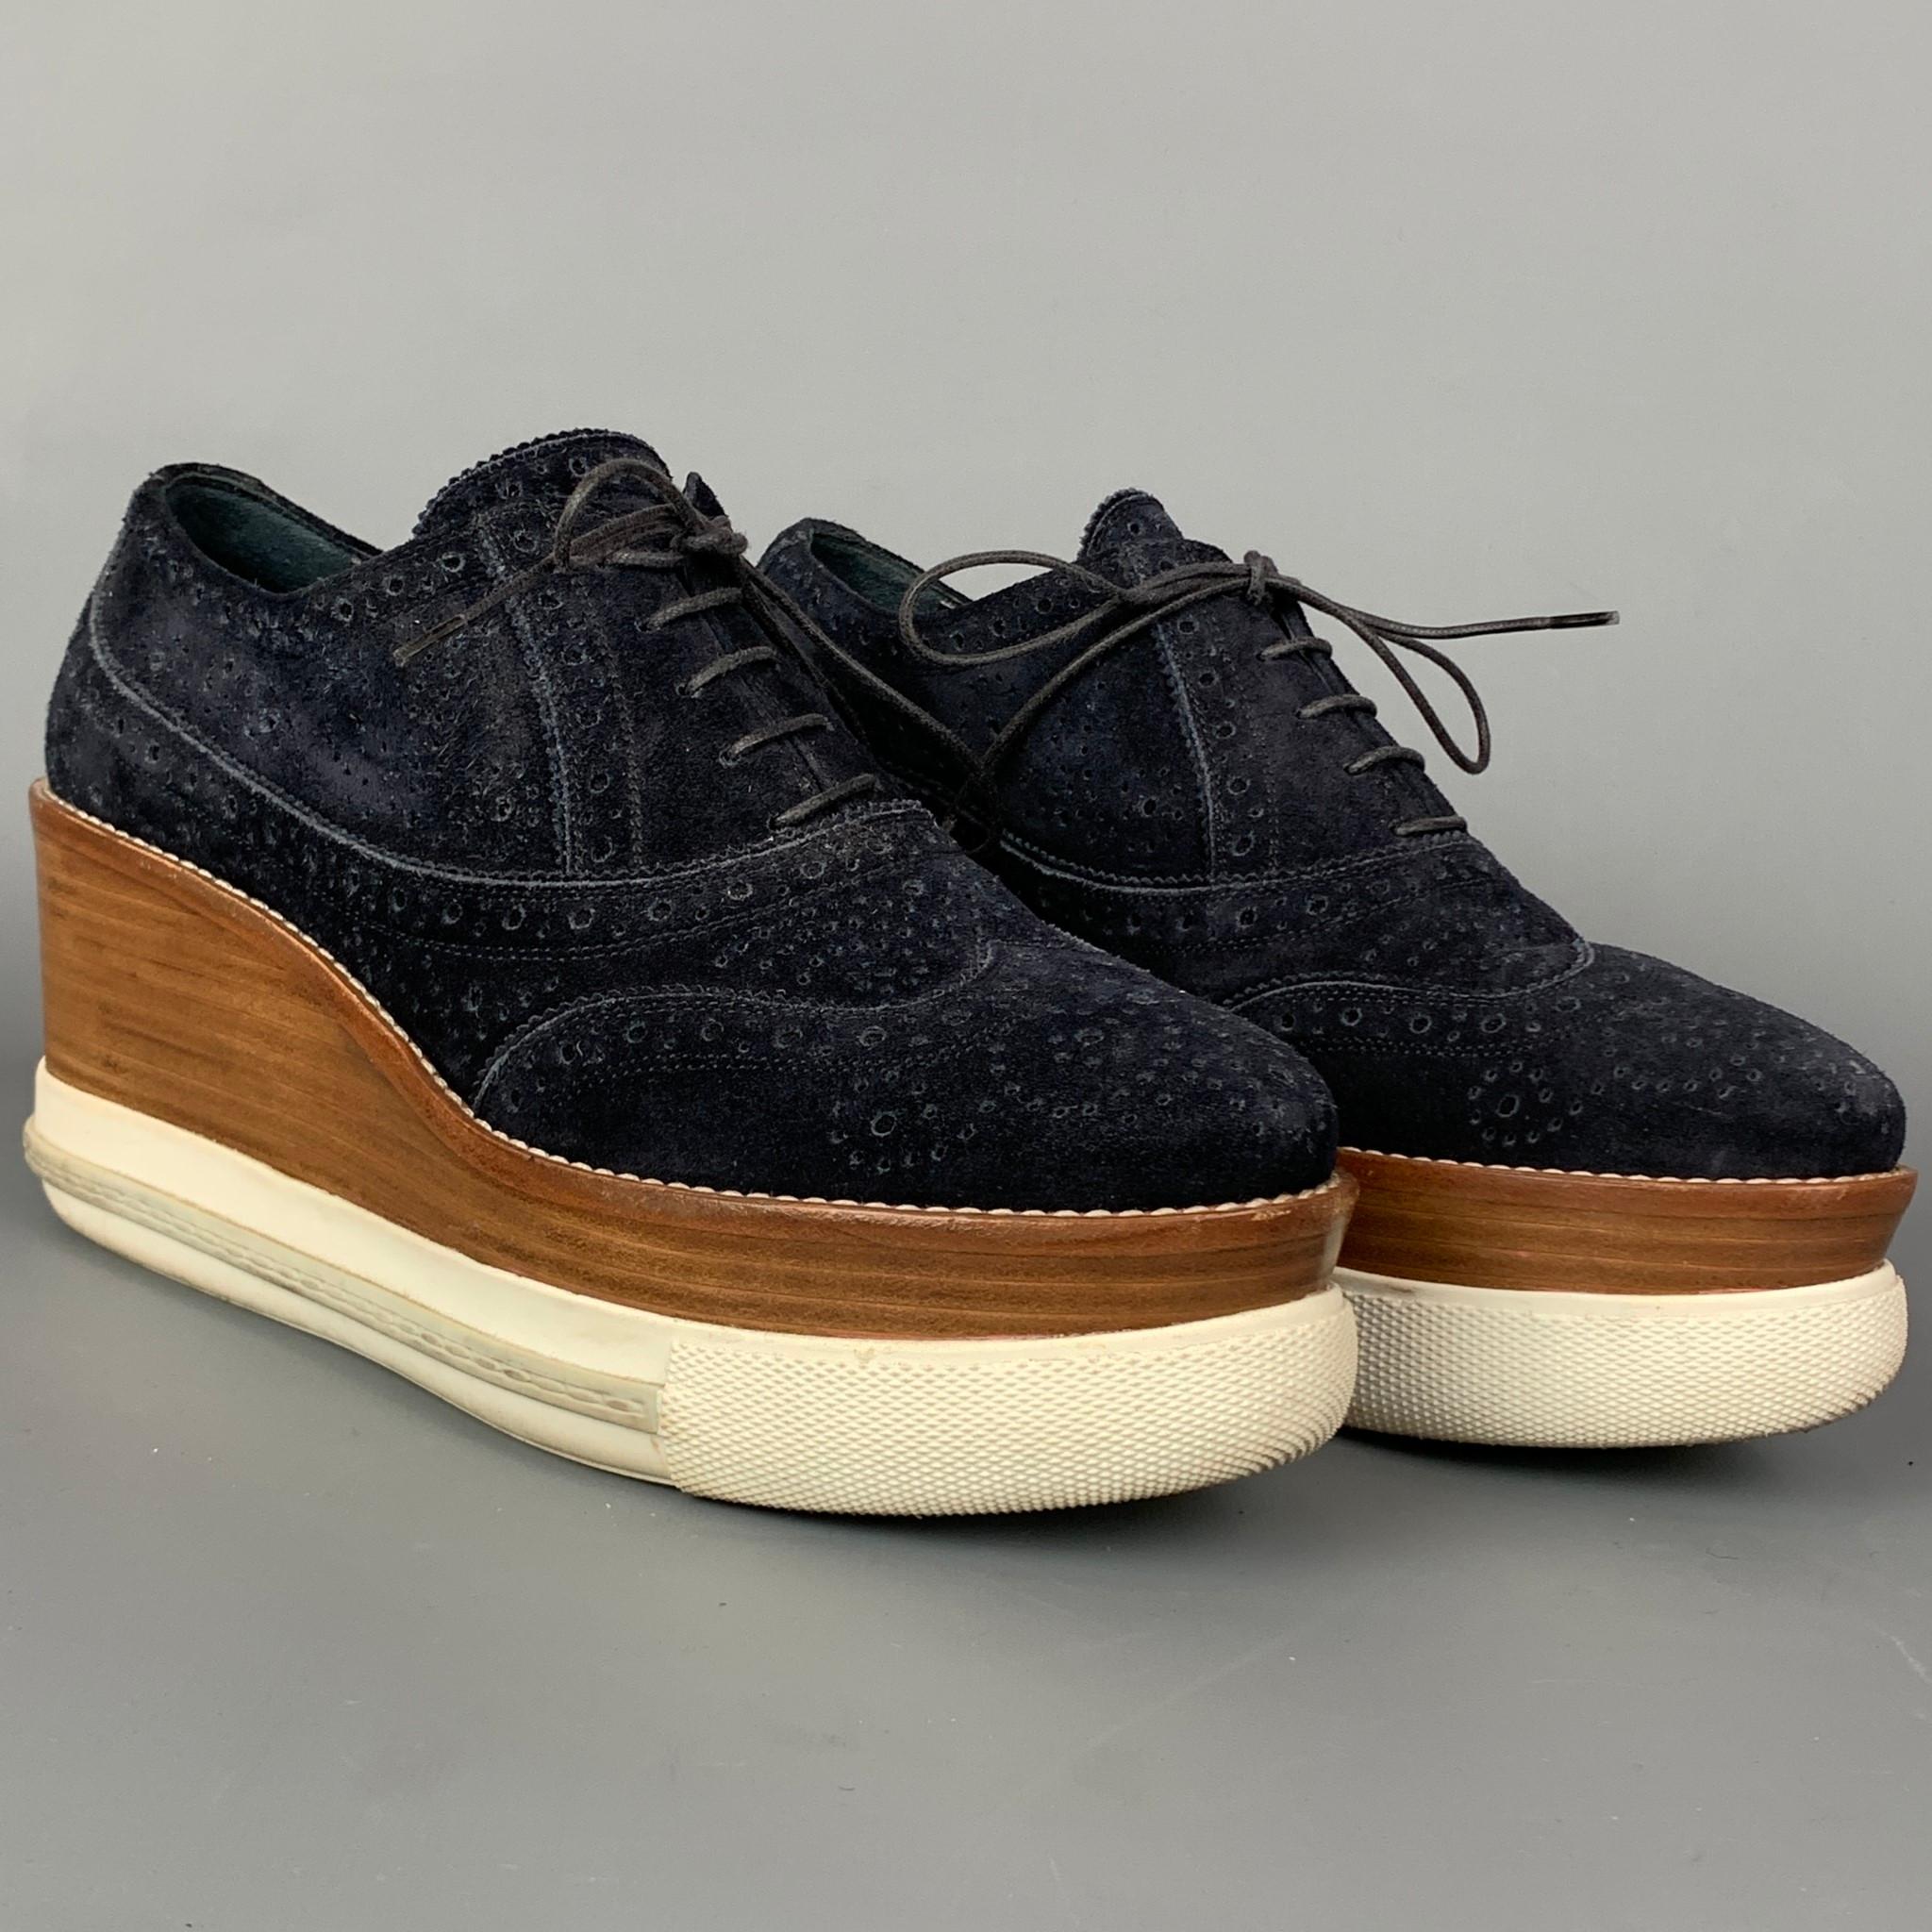 MIU MIU shoes comes in a navy perforated suede featuring a oxford style, wooden platform, rubber sole, and a lace up closure.

Good Pre-Owned Condition.
Marked: 38.5

Measurements:

Heel: 3.5 in.
Platform: 1.5 in.

SKU: 109916
Category: Laces

More